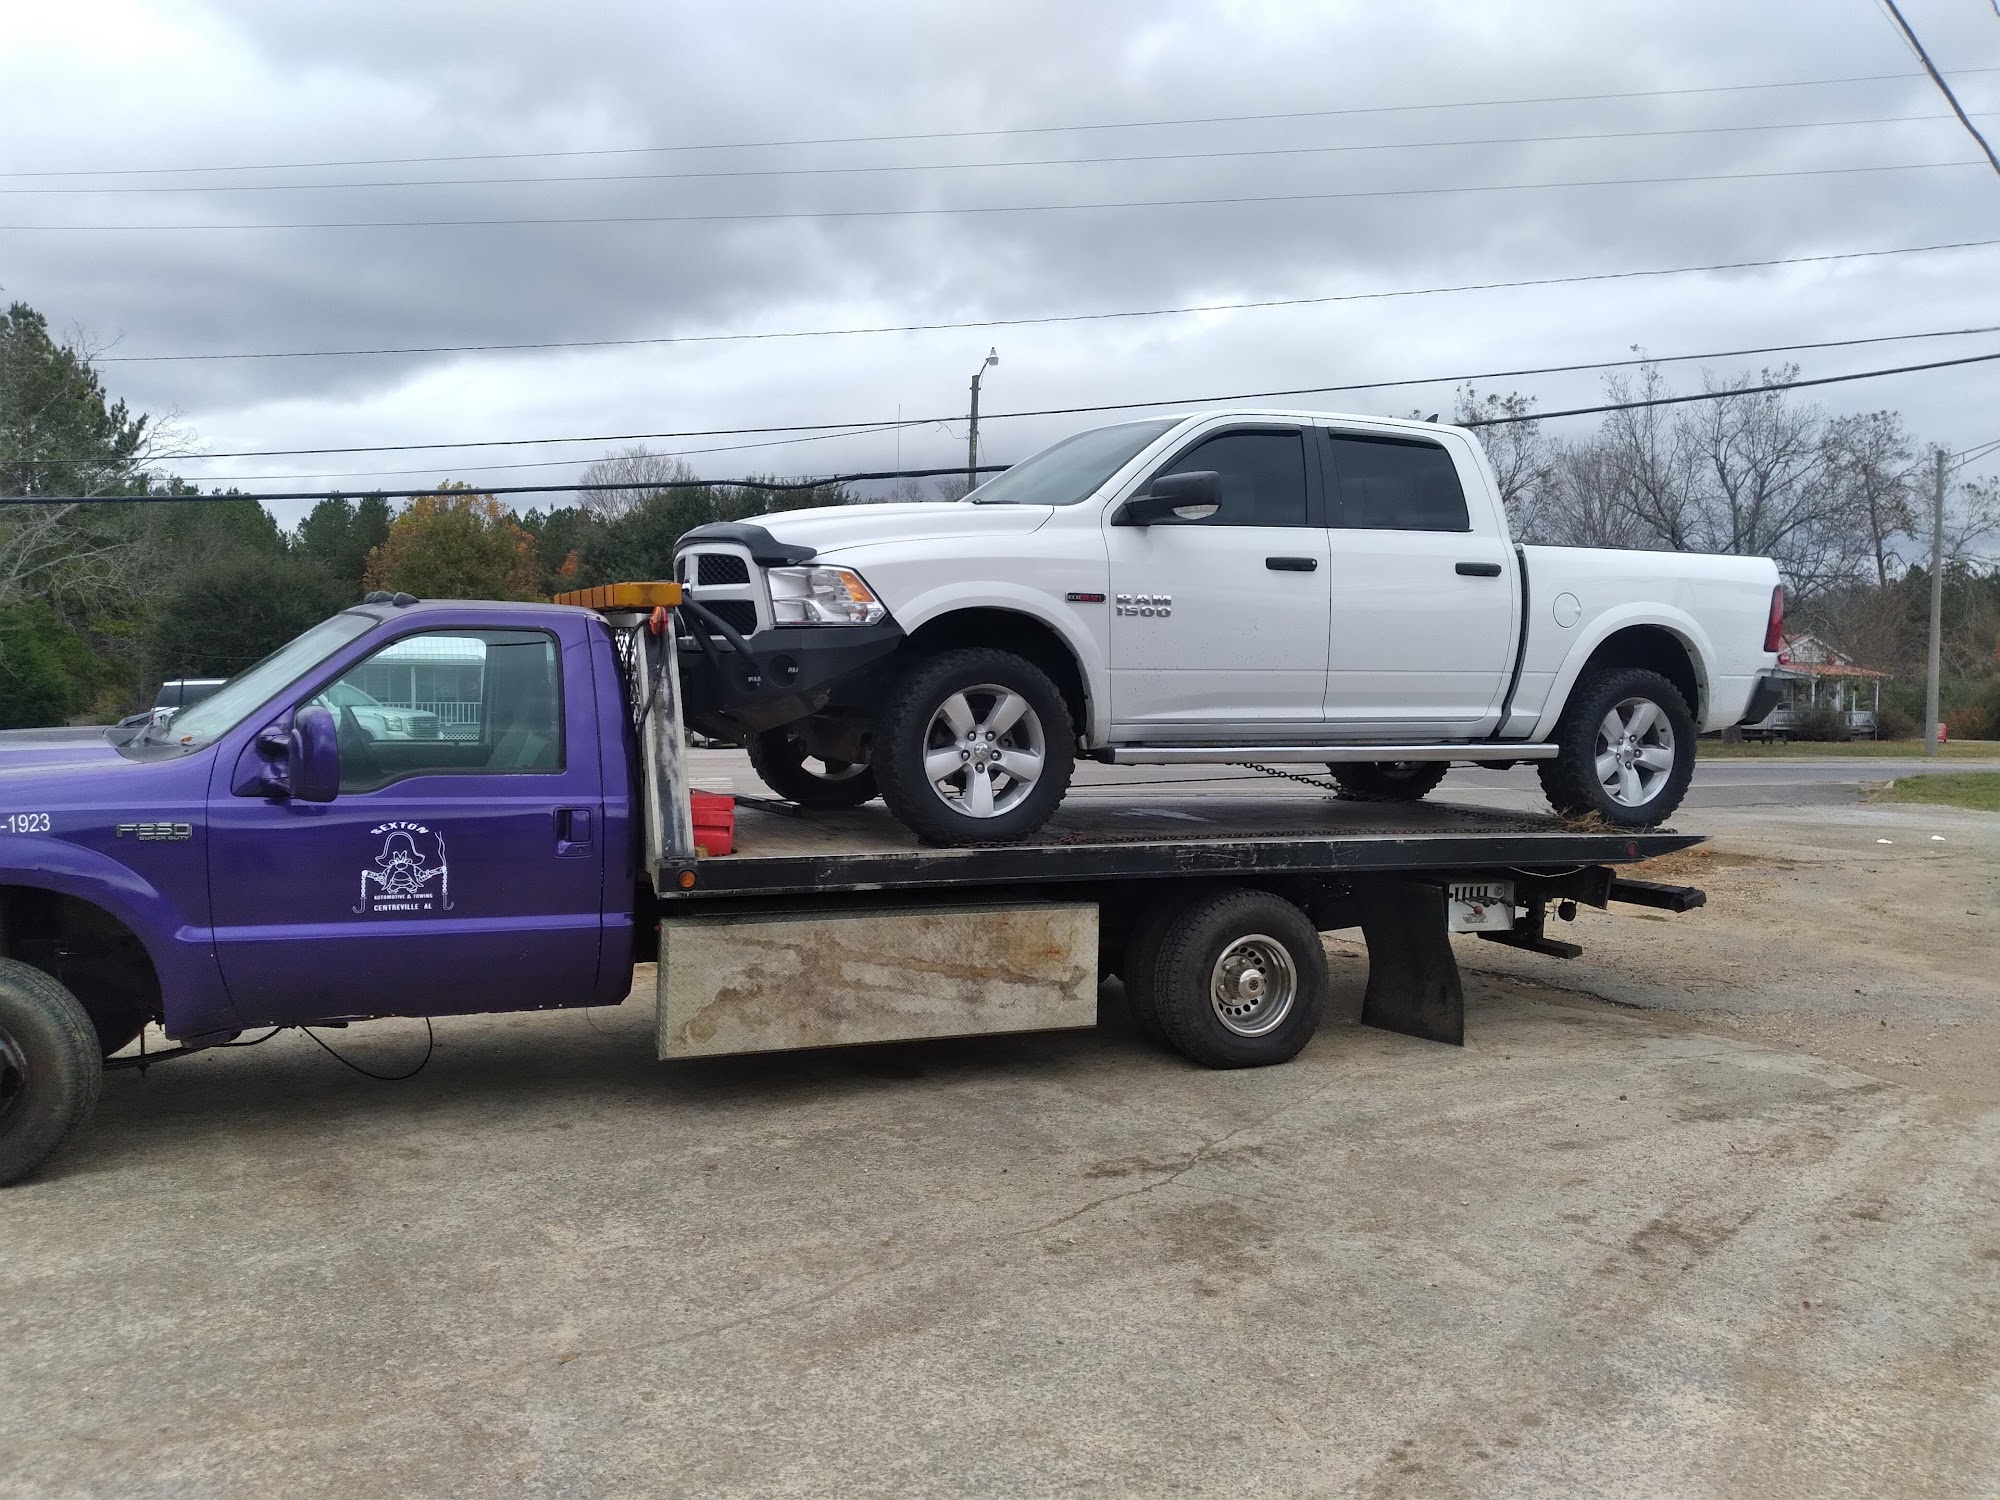 Sexton Automotive and Towing 7571 US-82 East, Centreville Alabama 35042